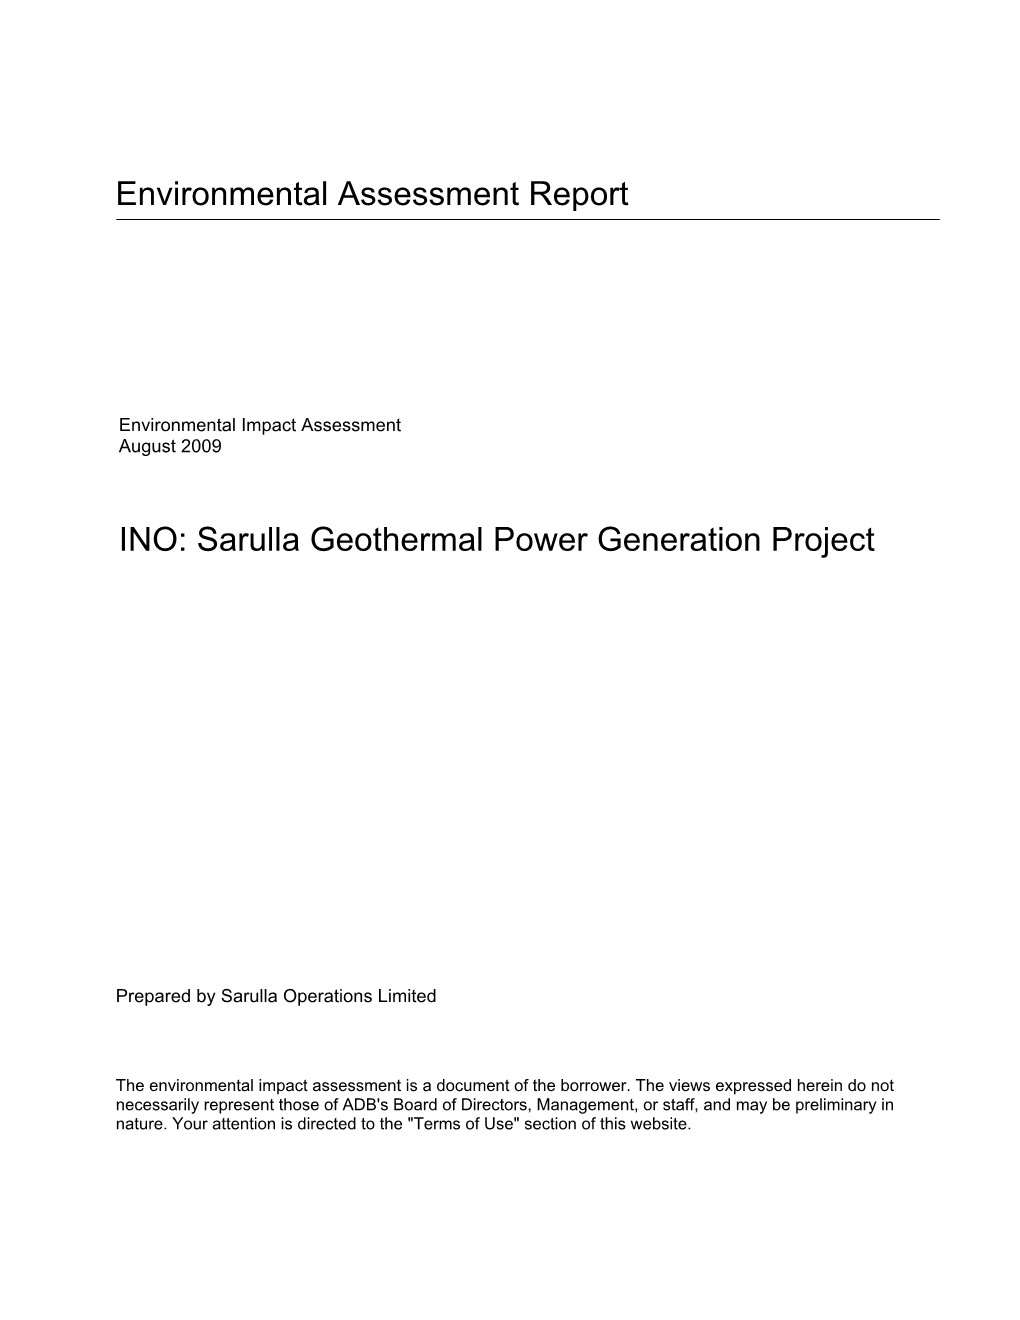 Sarulla Geothermal Power Generation Project